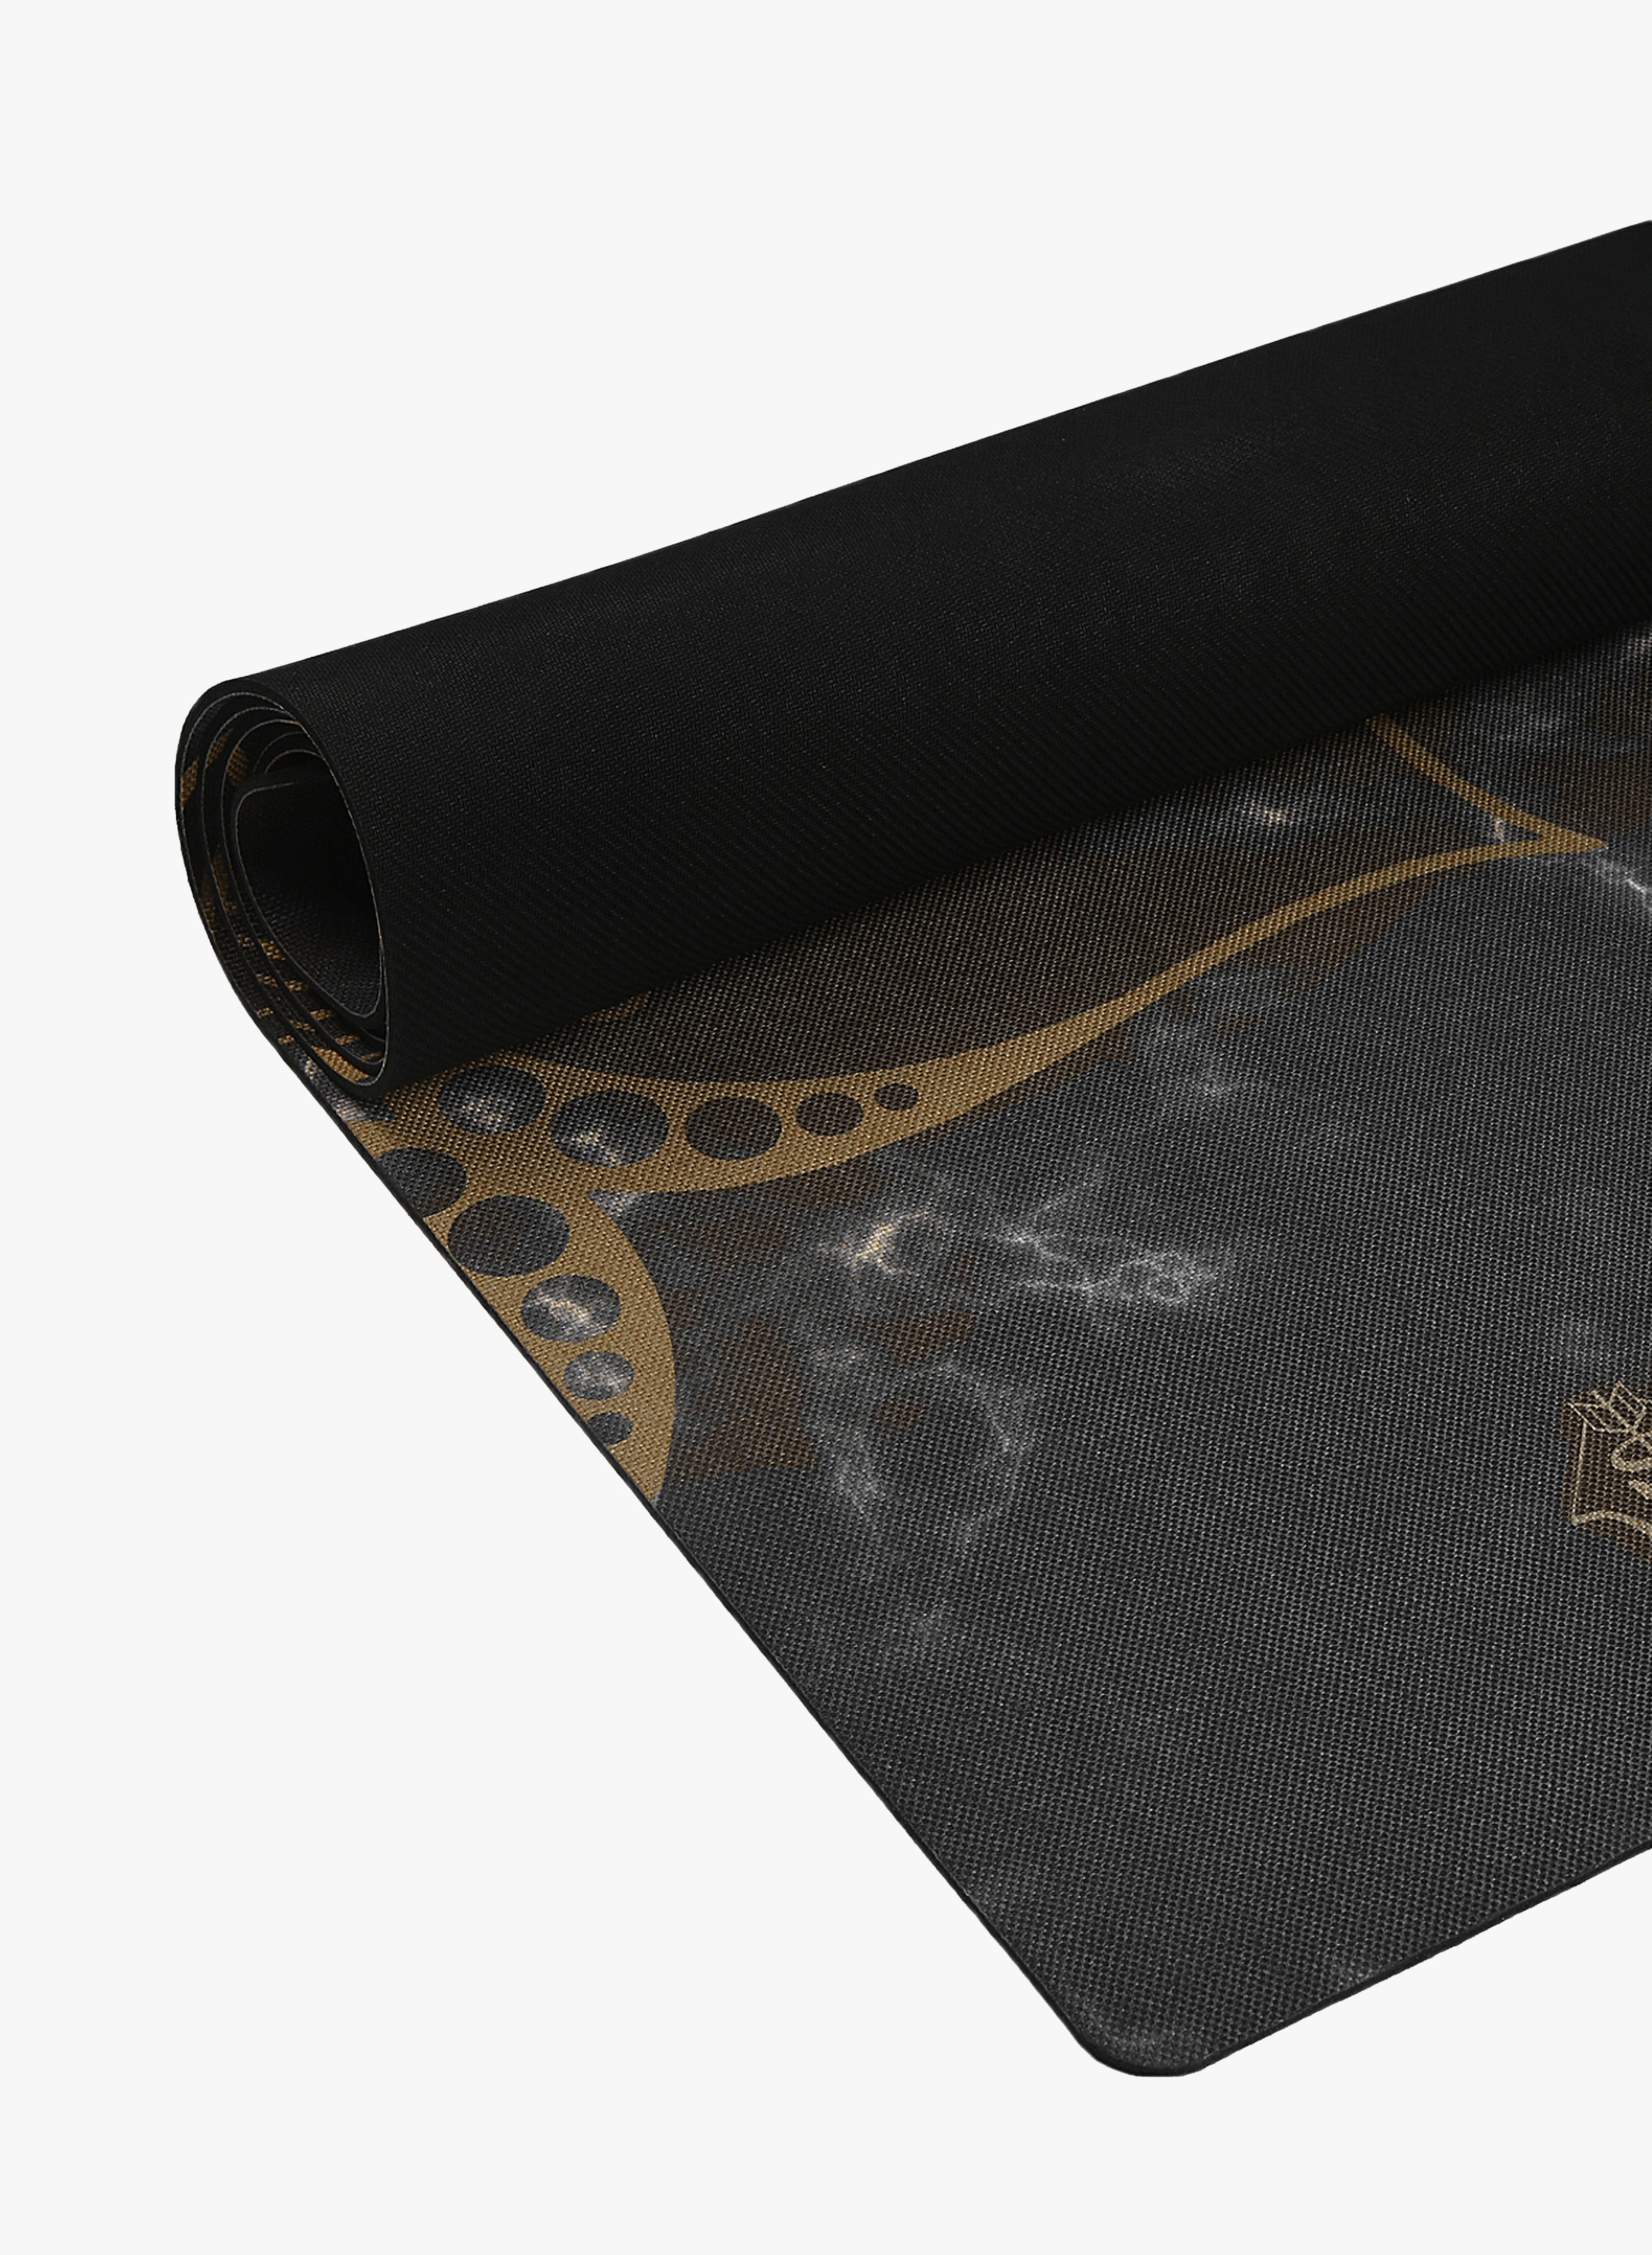 Shakti Warrior Crown Chakra Hemp Yoga Mat - Immerse in spiritual symbolism and eco-conscious luxury on a sustainable hemp mat. Experience natural grip and divine connection for a transcendent yoga journey.